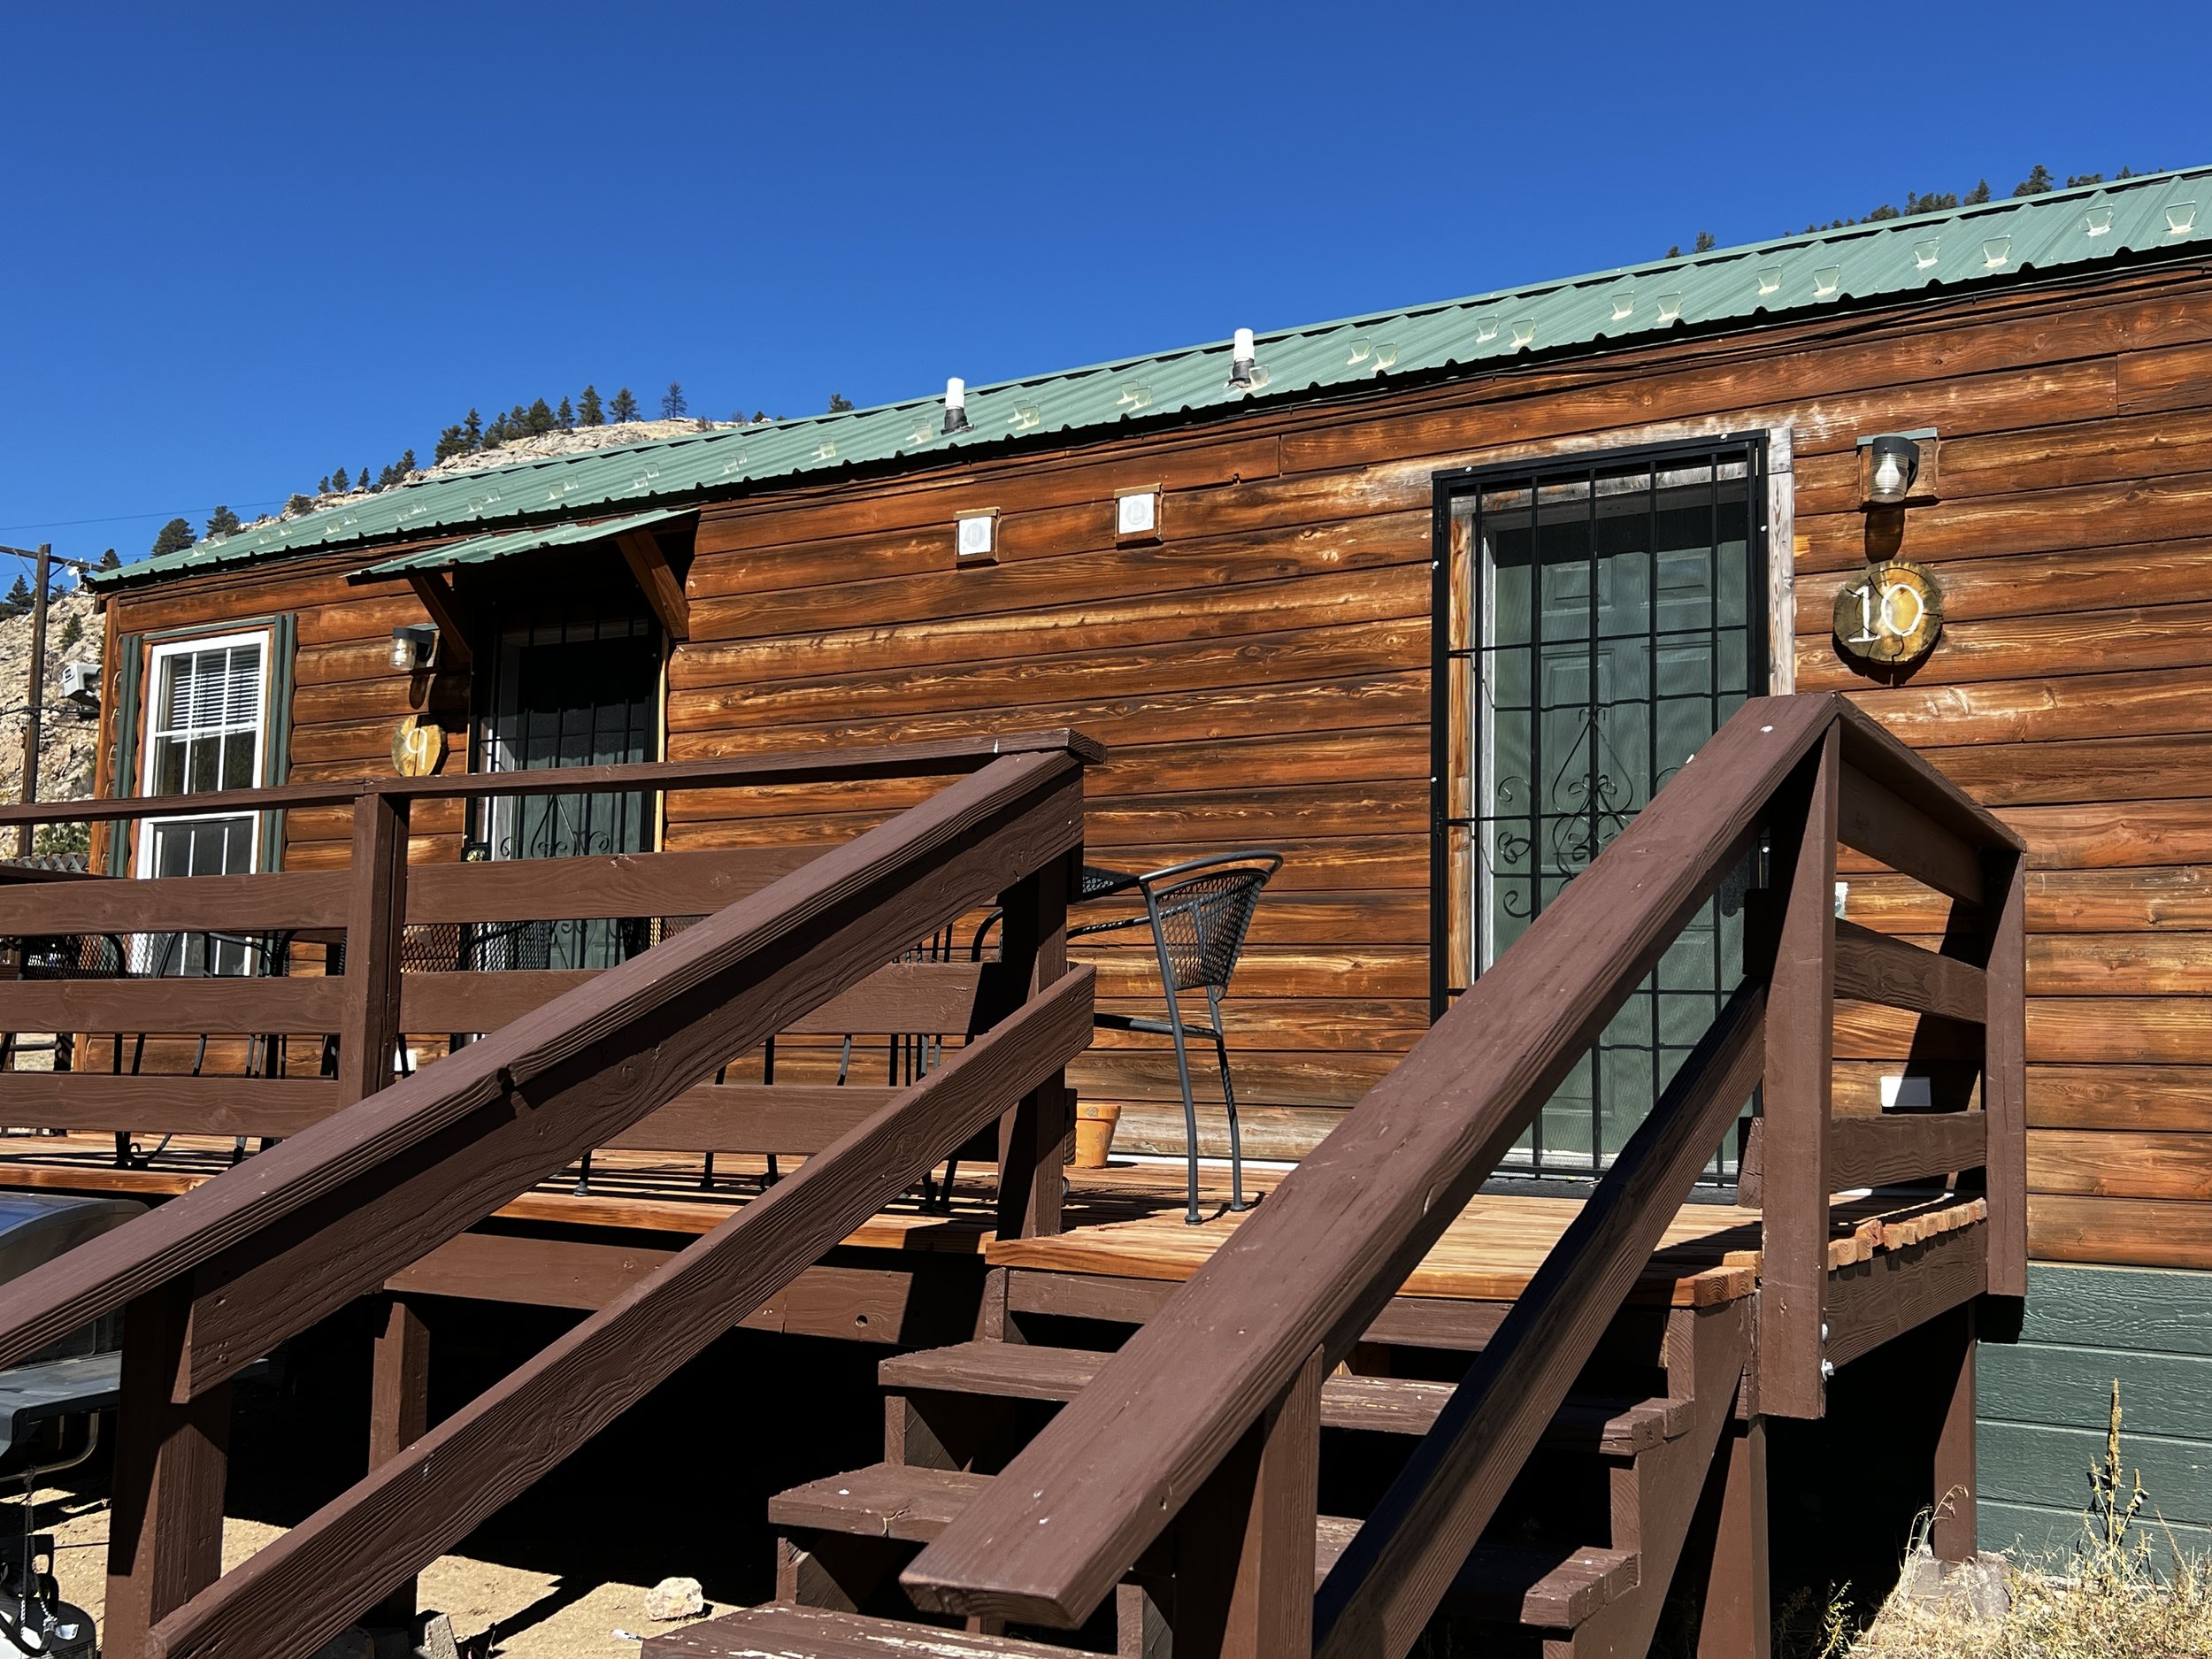 Cabins 9 and 10